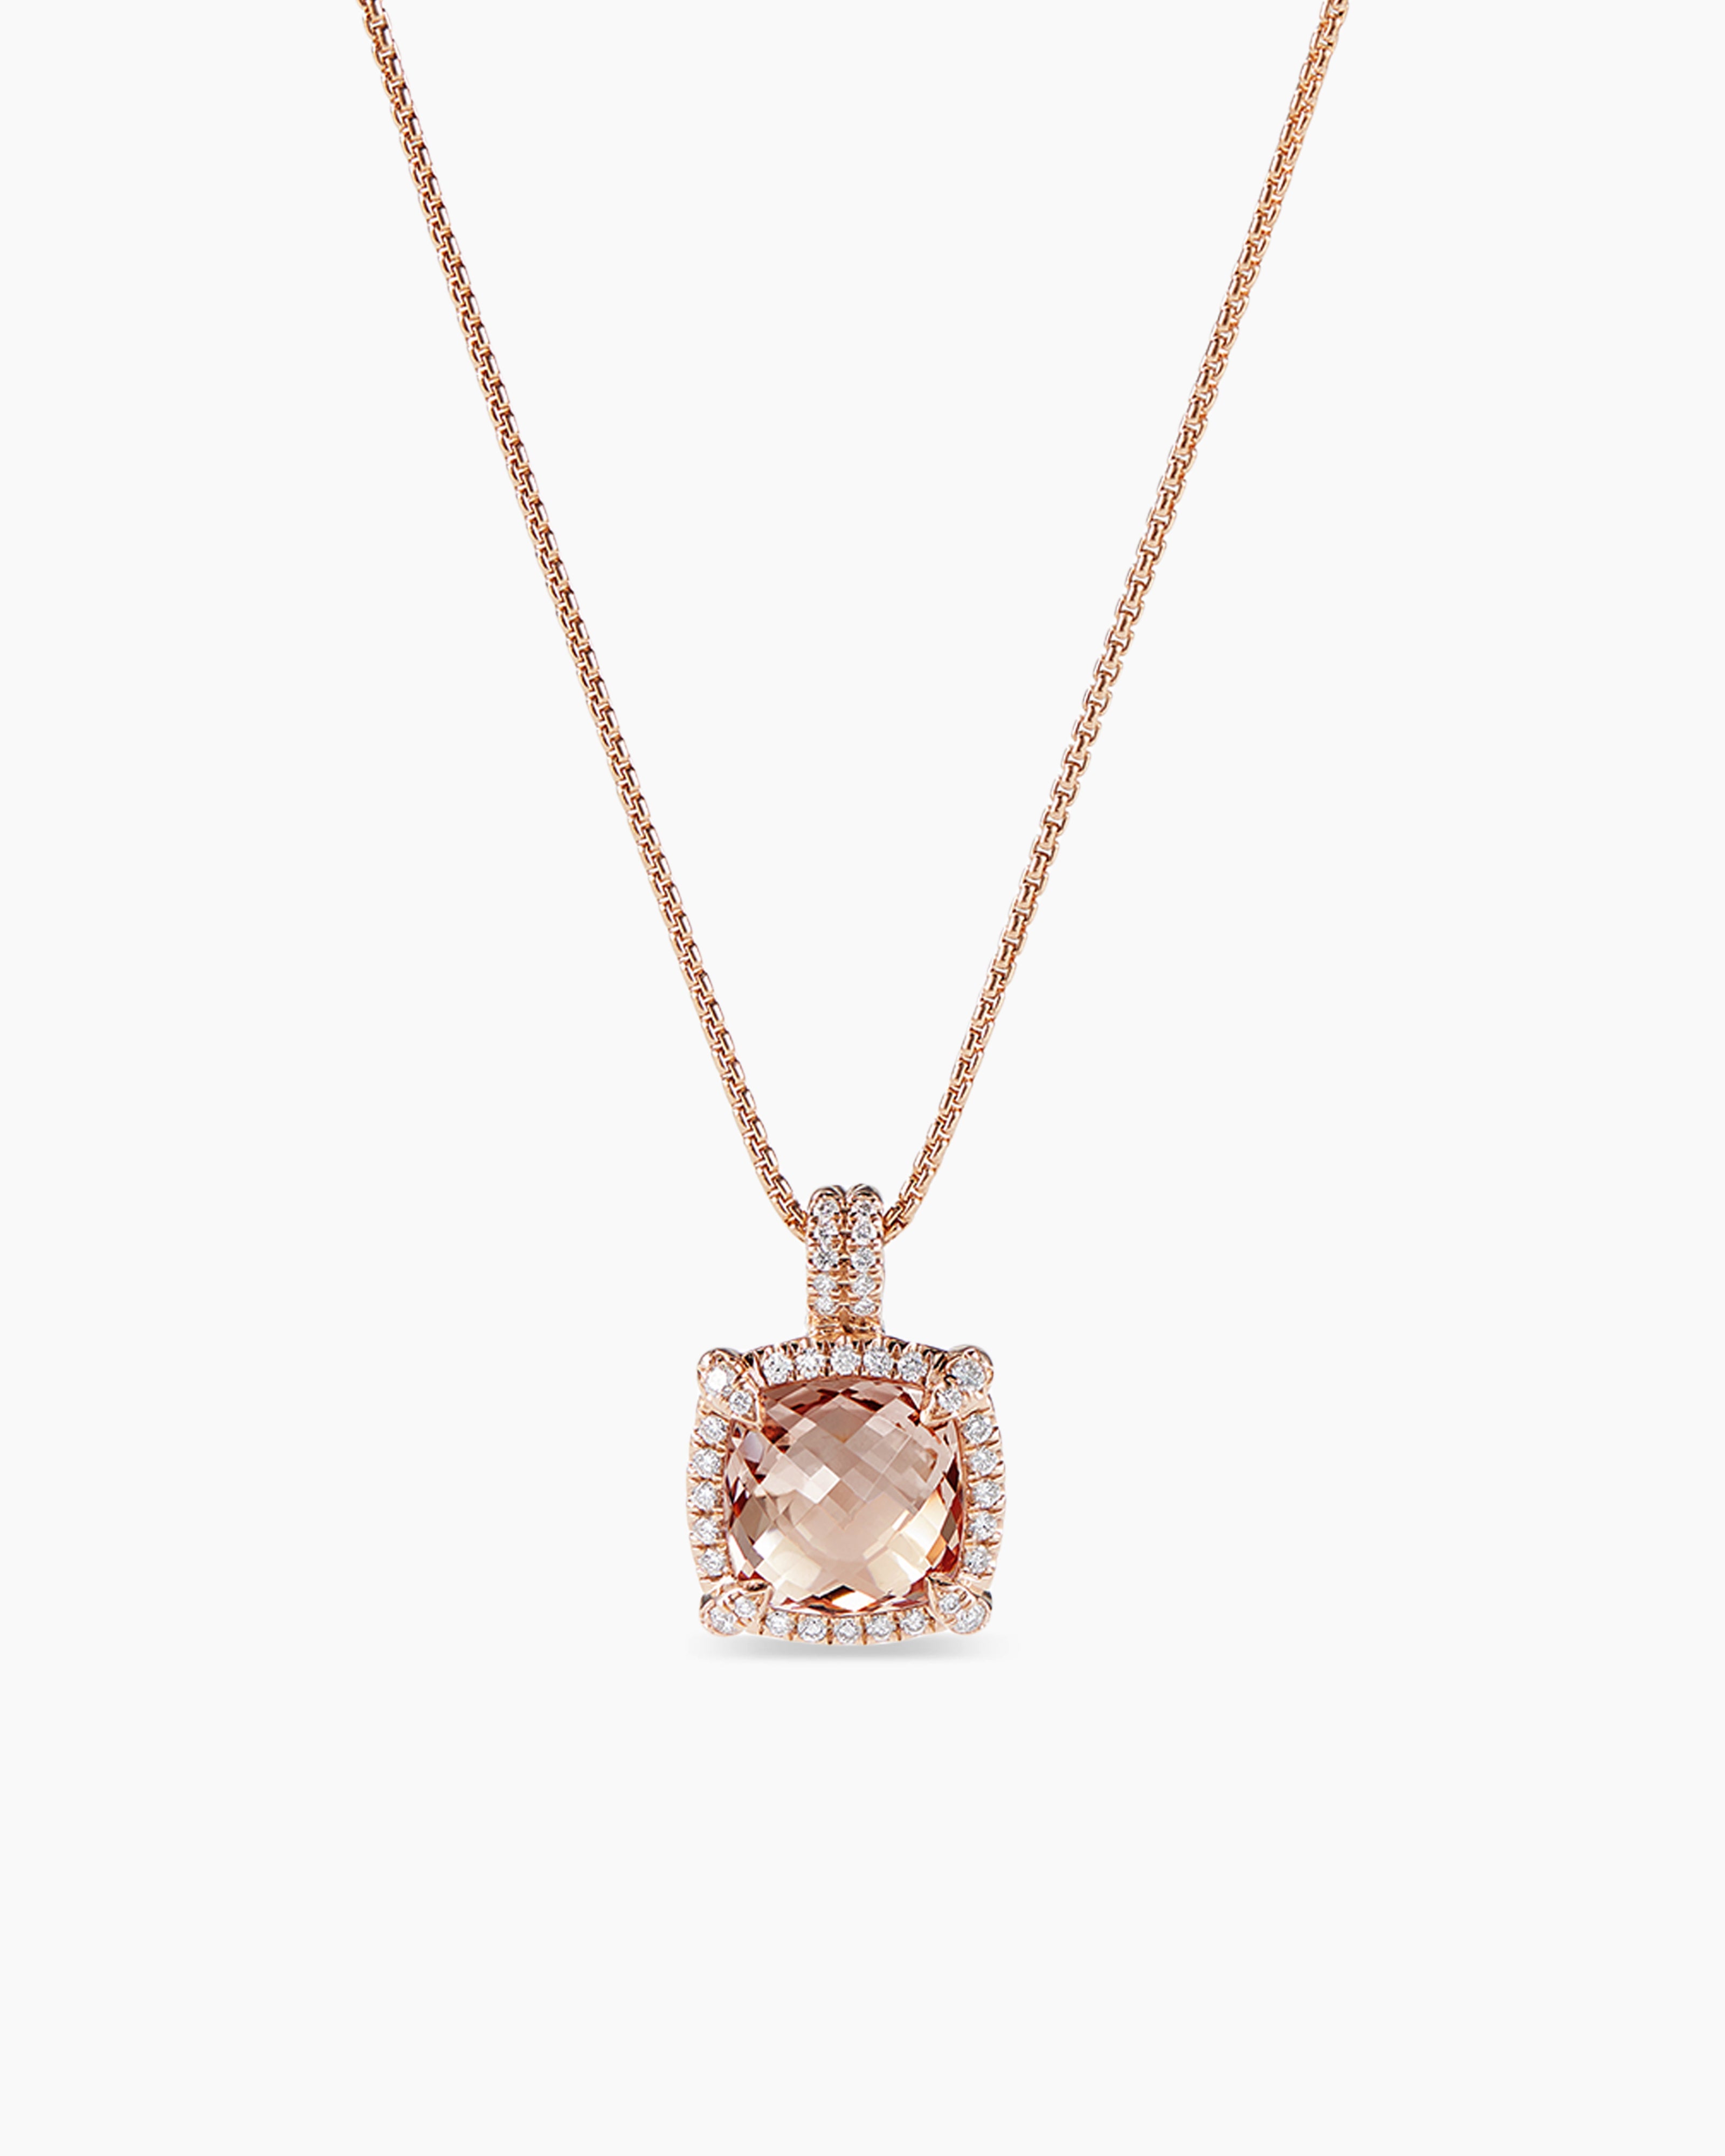 XIAQUJ Design Delicate Rose Flower Zircon Pendant Necklace Rose Gold Plated Charms Rose Fresh Sweet Collarbone Chain Fashion Simple Pink Diamond